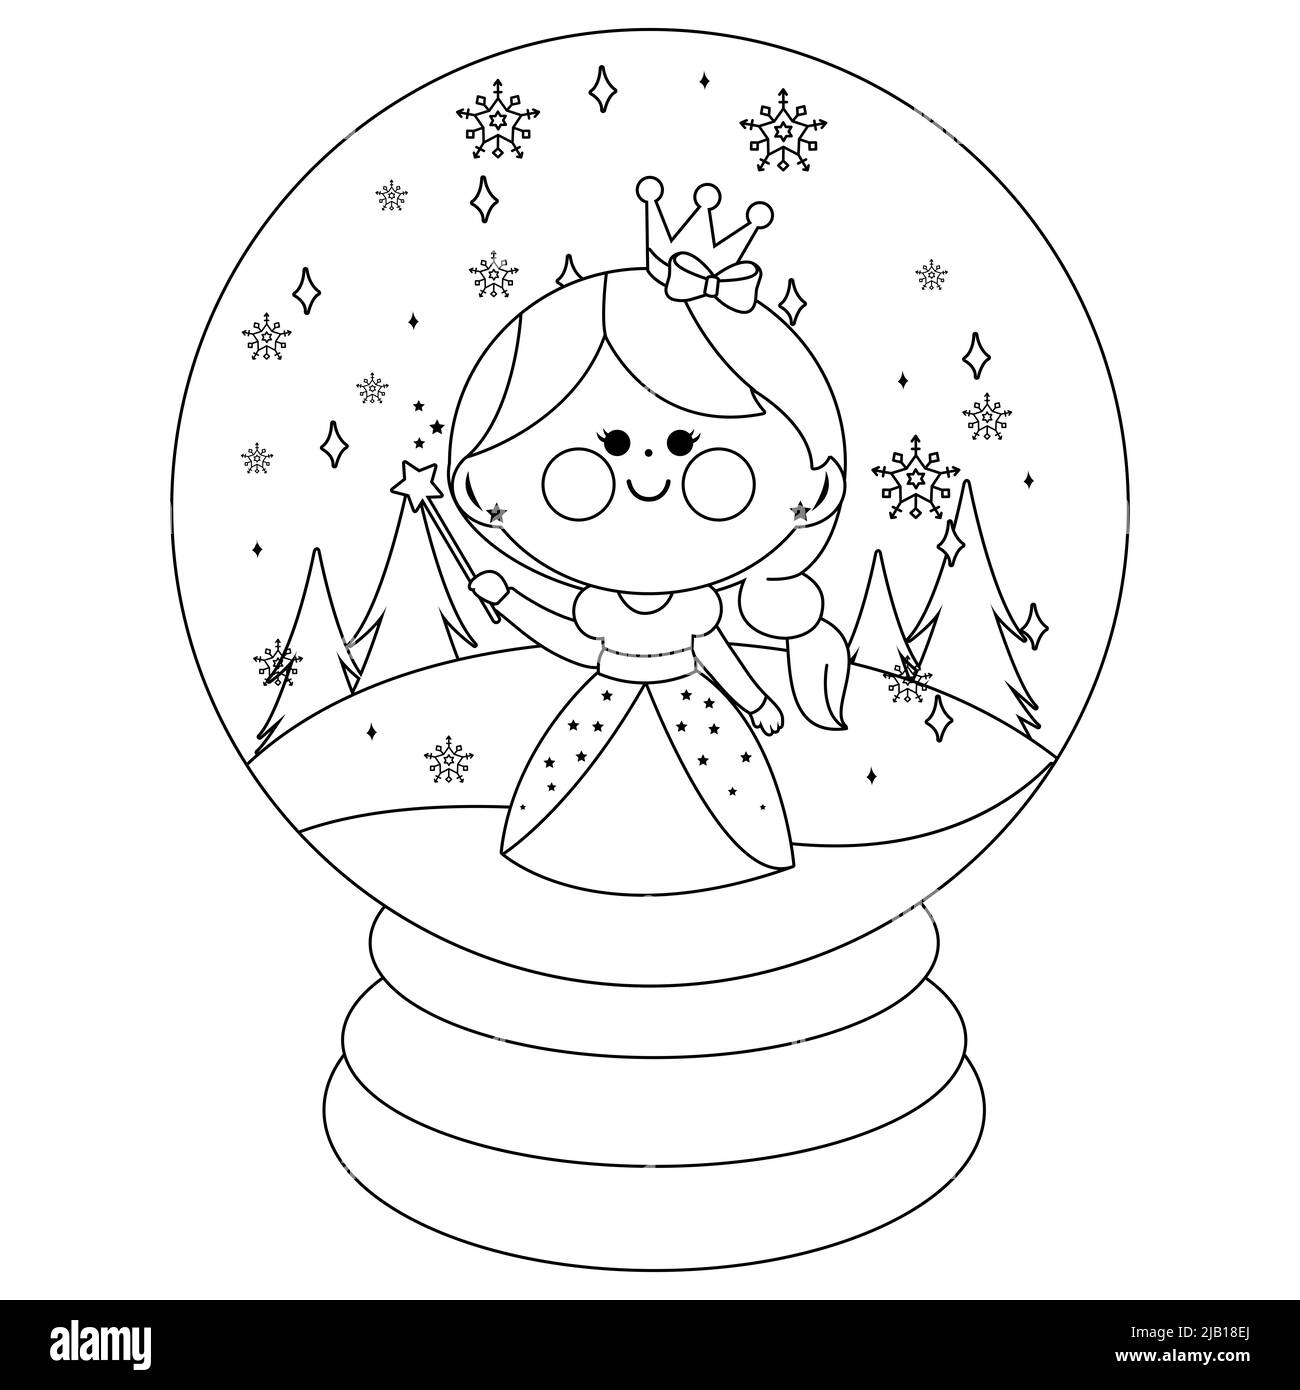 Snowglobe black and white stock photos images